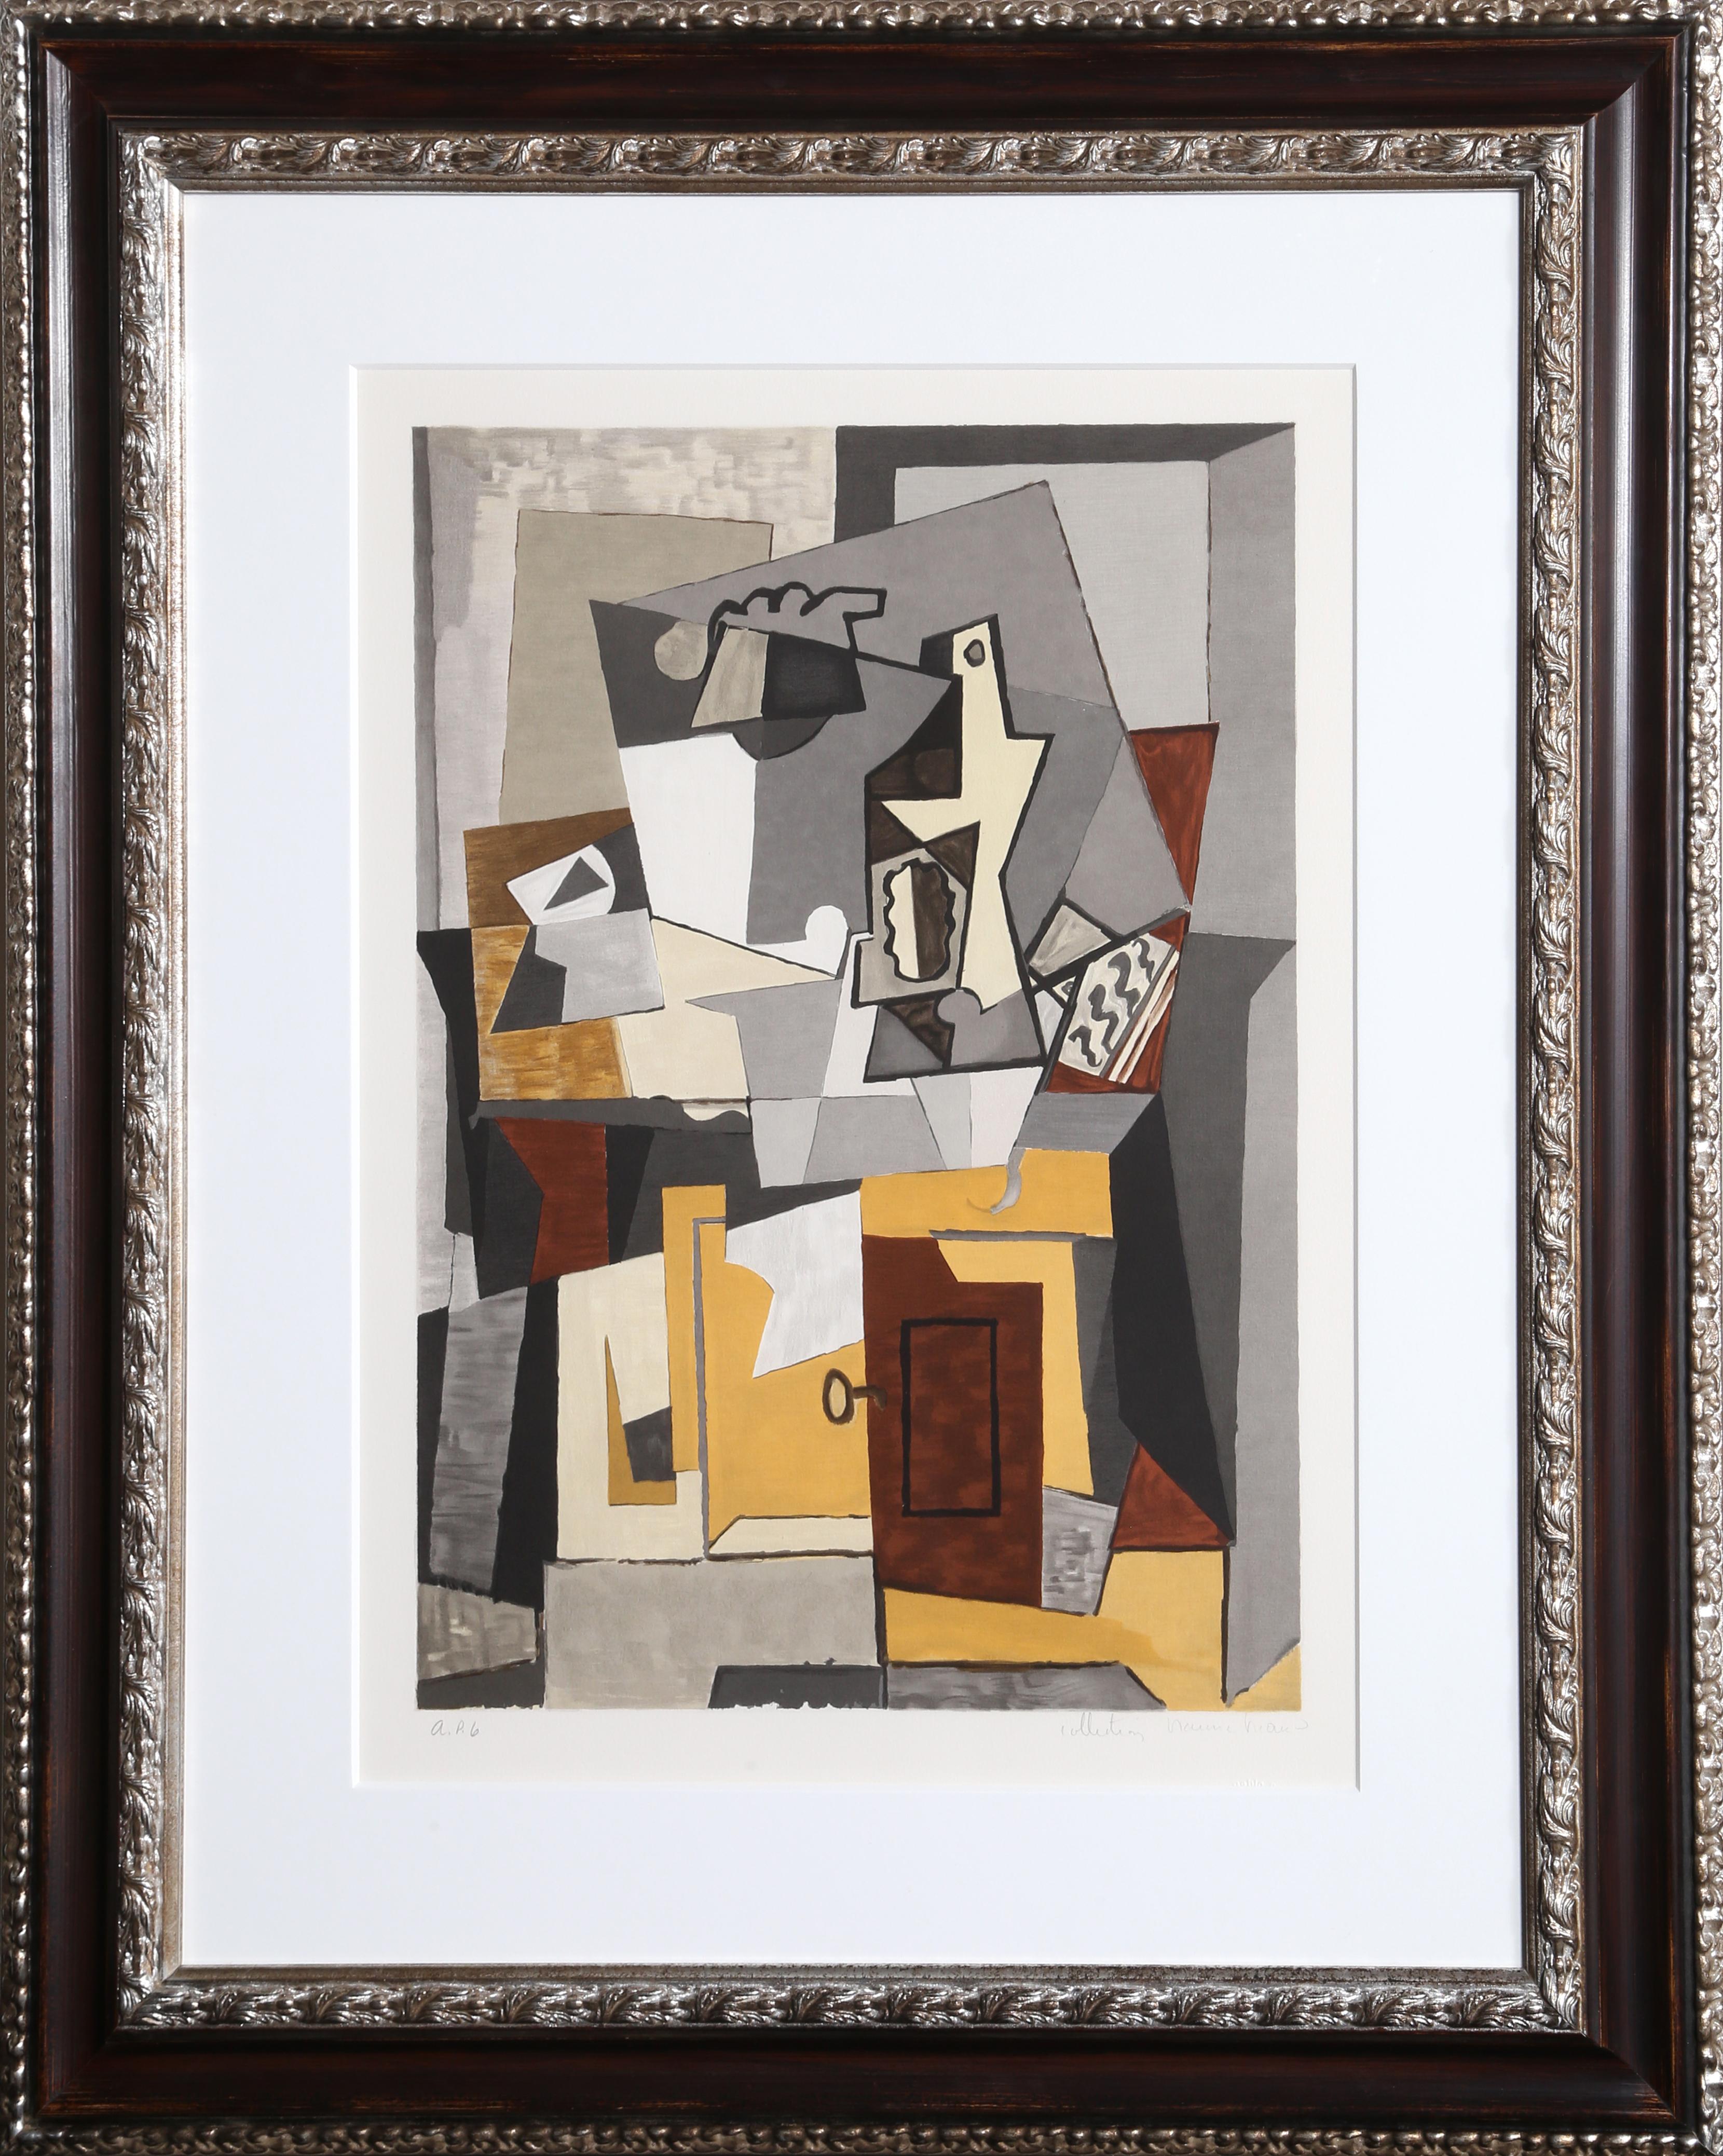 A lithograph from the Marina Picasso Estate Collection after the Pablo Picasso painting "Nature Morte a la Porte et a la Clef". The original painting was completed in 1920. In the 1970's after Picasso's death, Marina Picasso, his granddaughter,